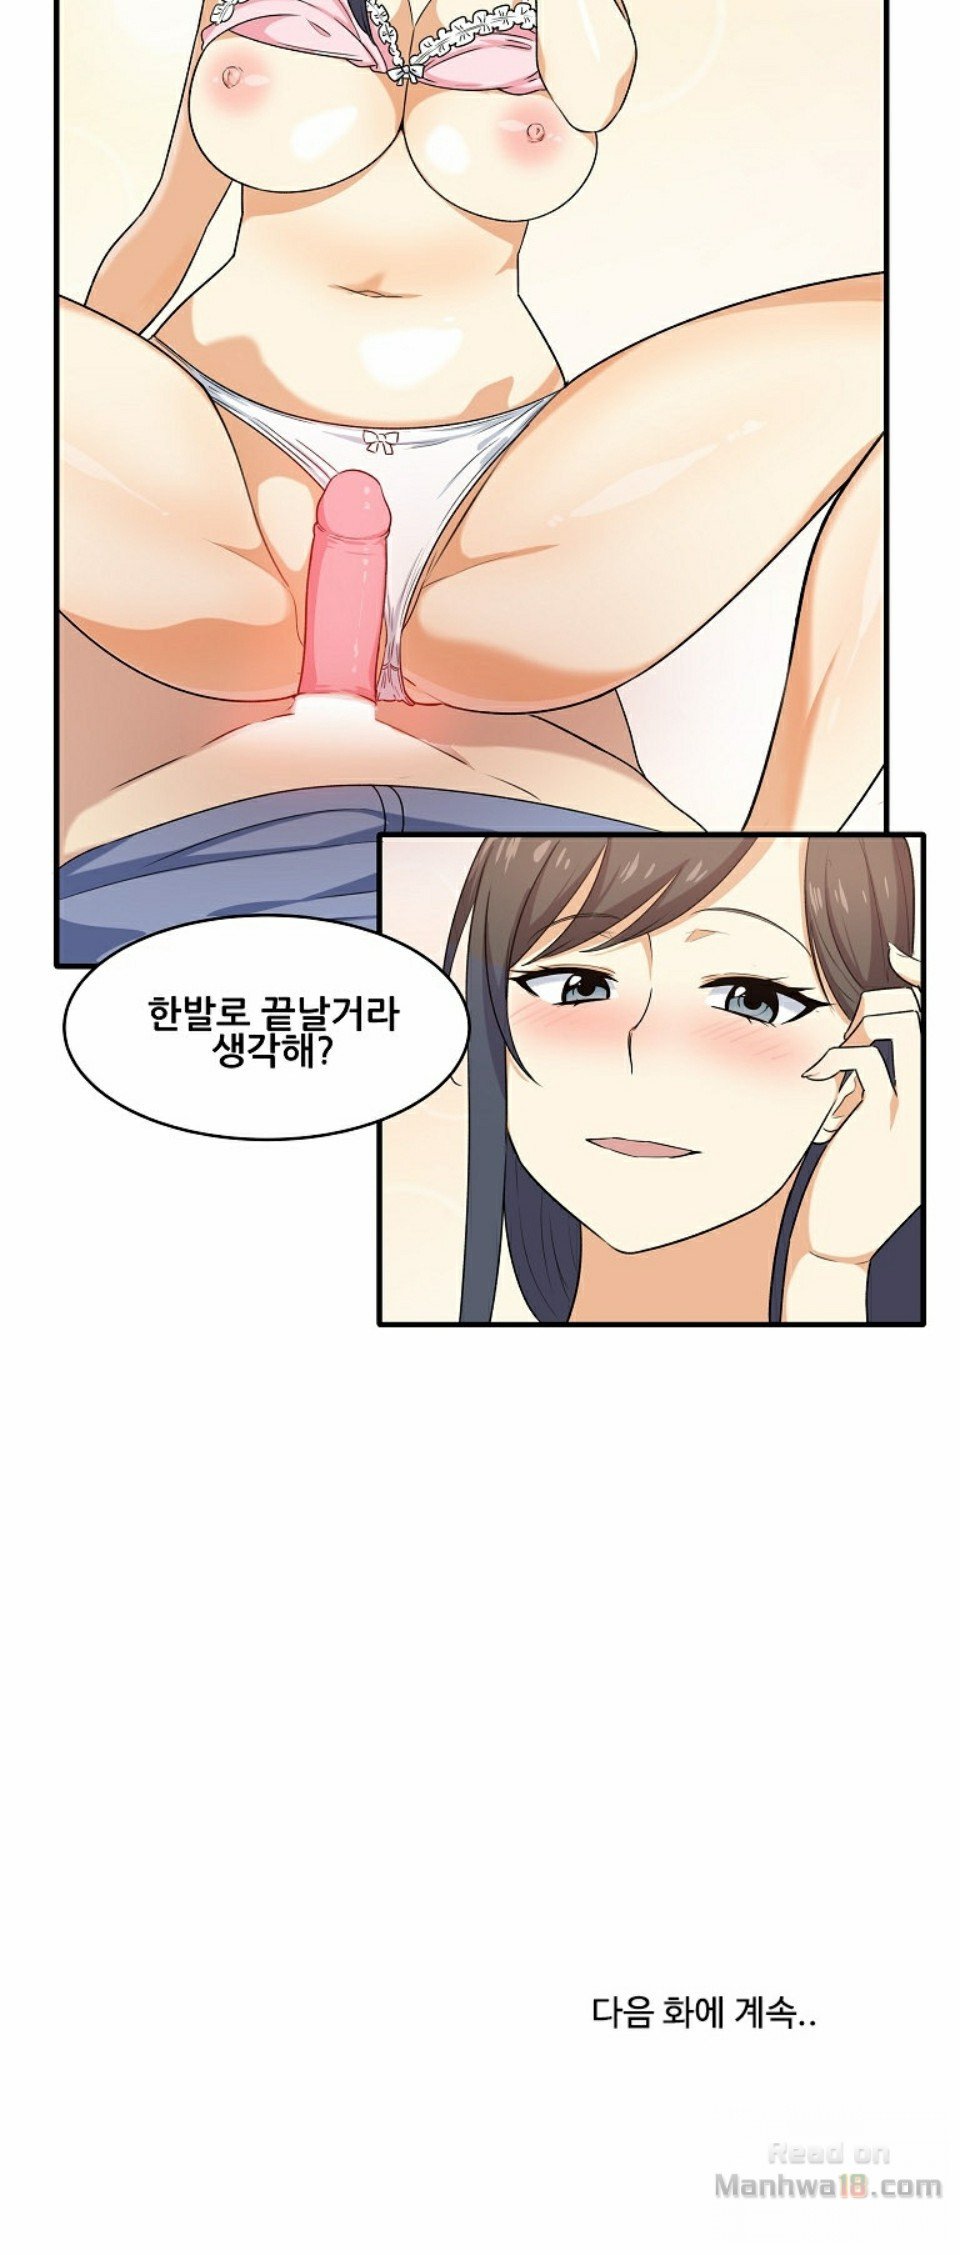 the-ark-is-me-raw-chap-3-20